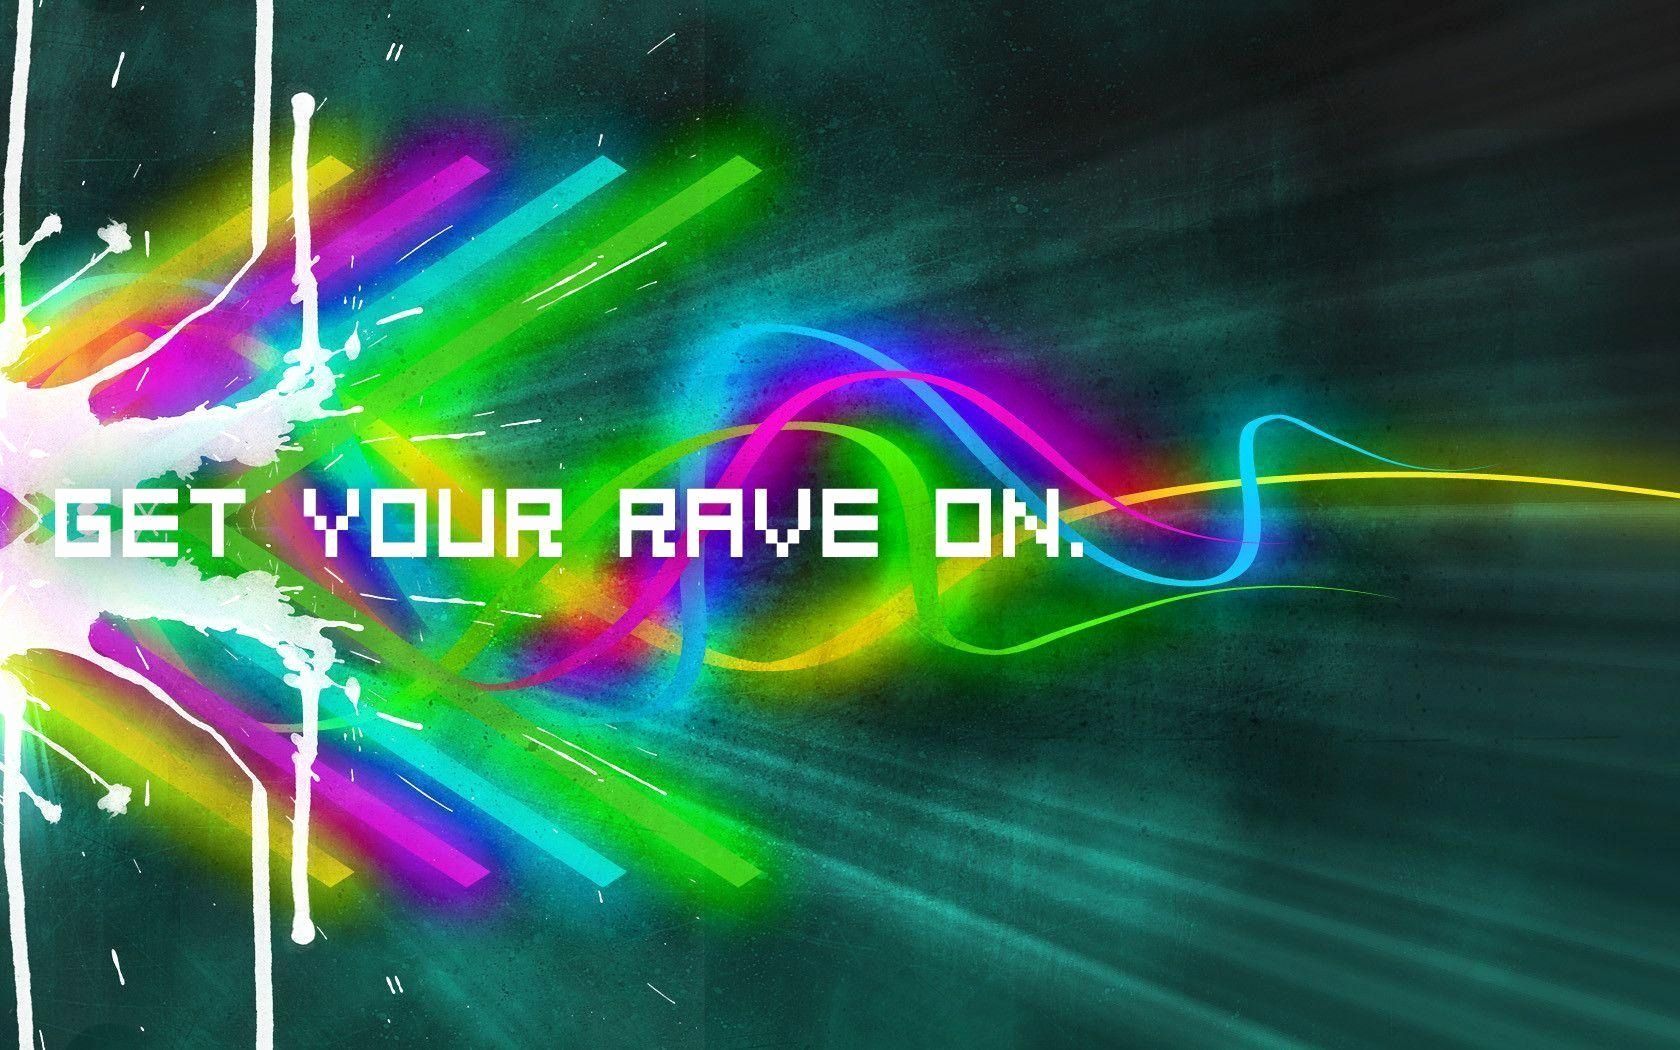 Raver Wallpaper Awesome Ecstasy Molly Mdma and Mda the Same Thing